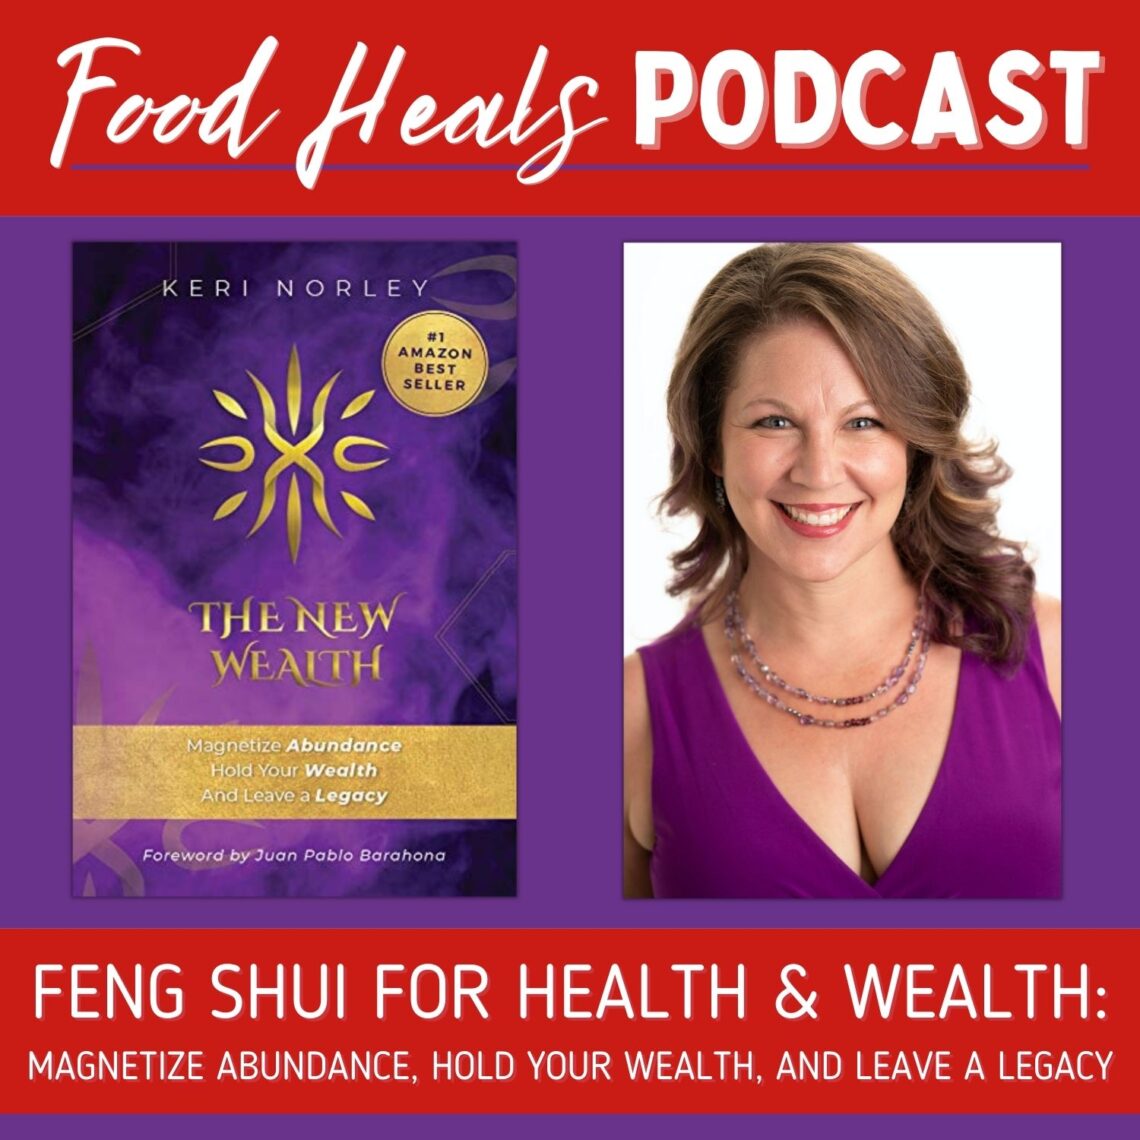 Keri Norley on The Food Heals Podcast